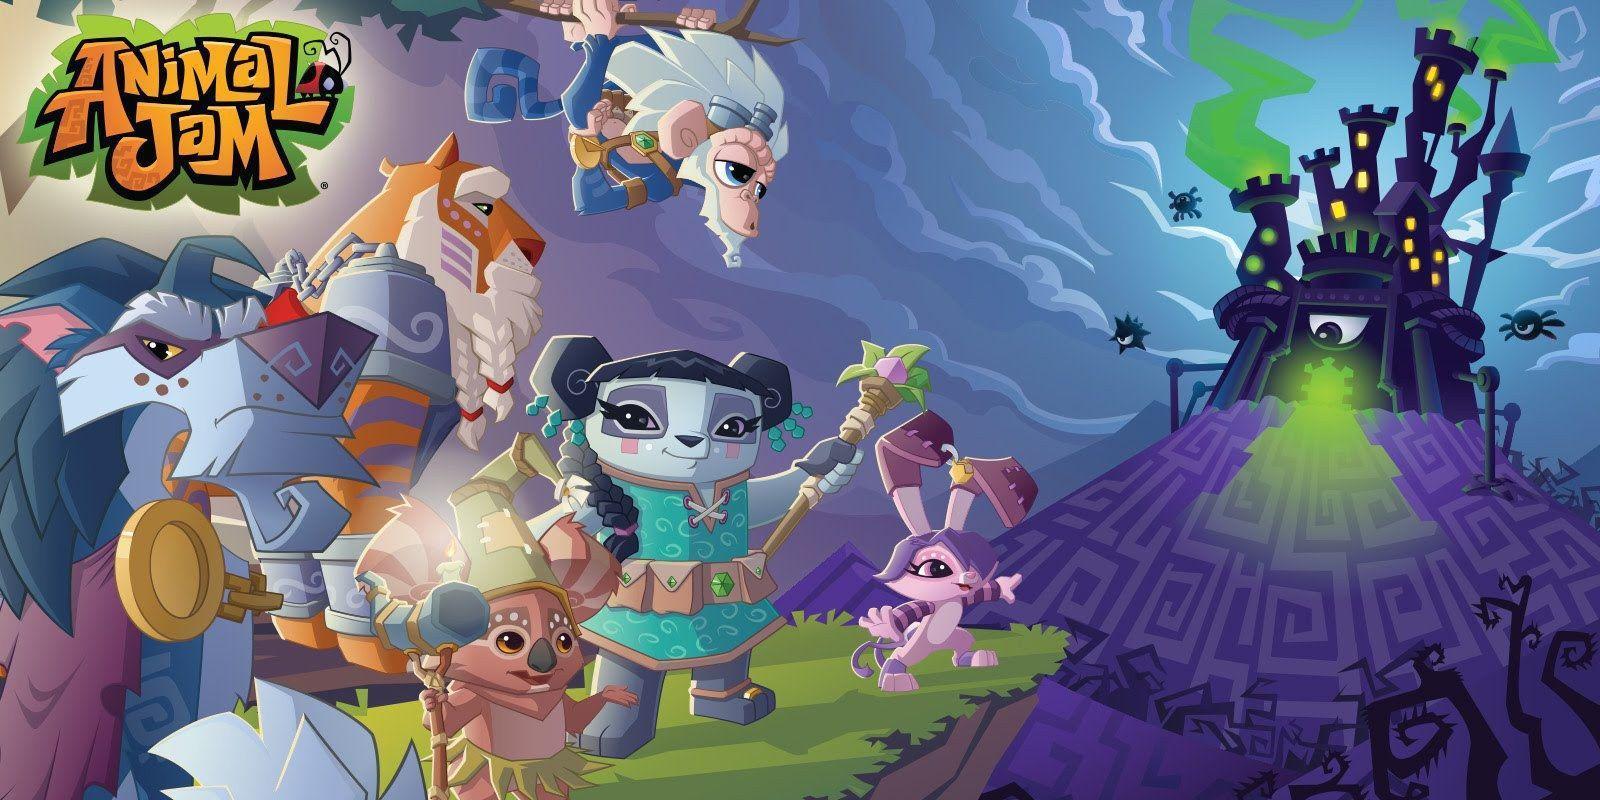 Dynamite aims for youngsters with new Animal Jam license